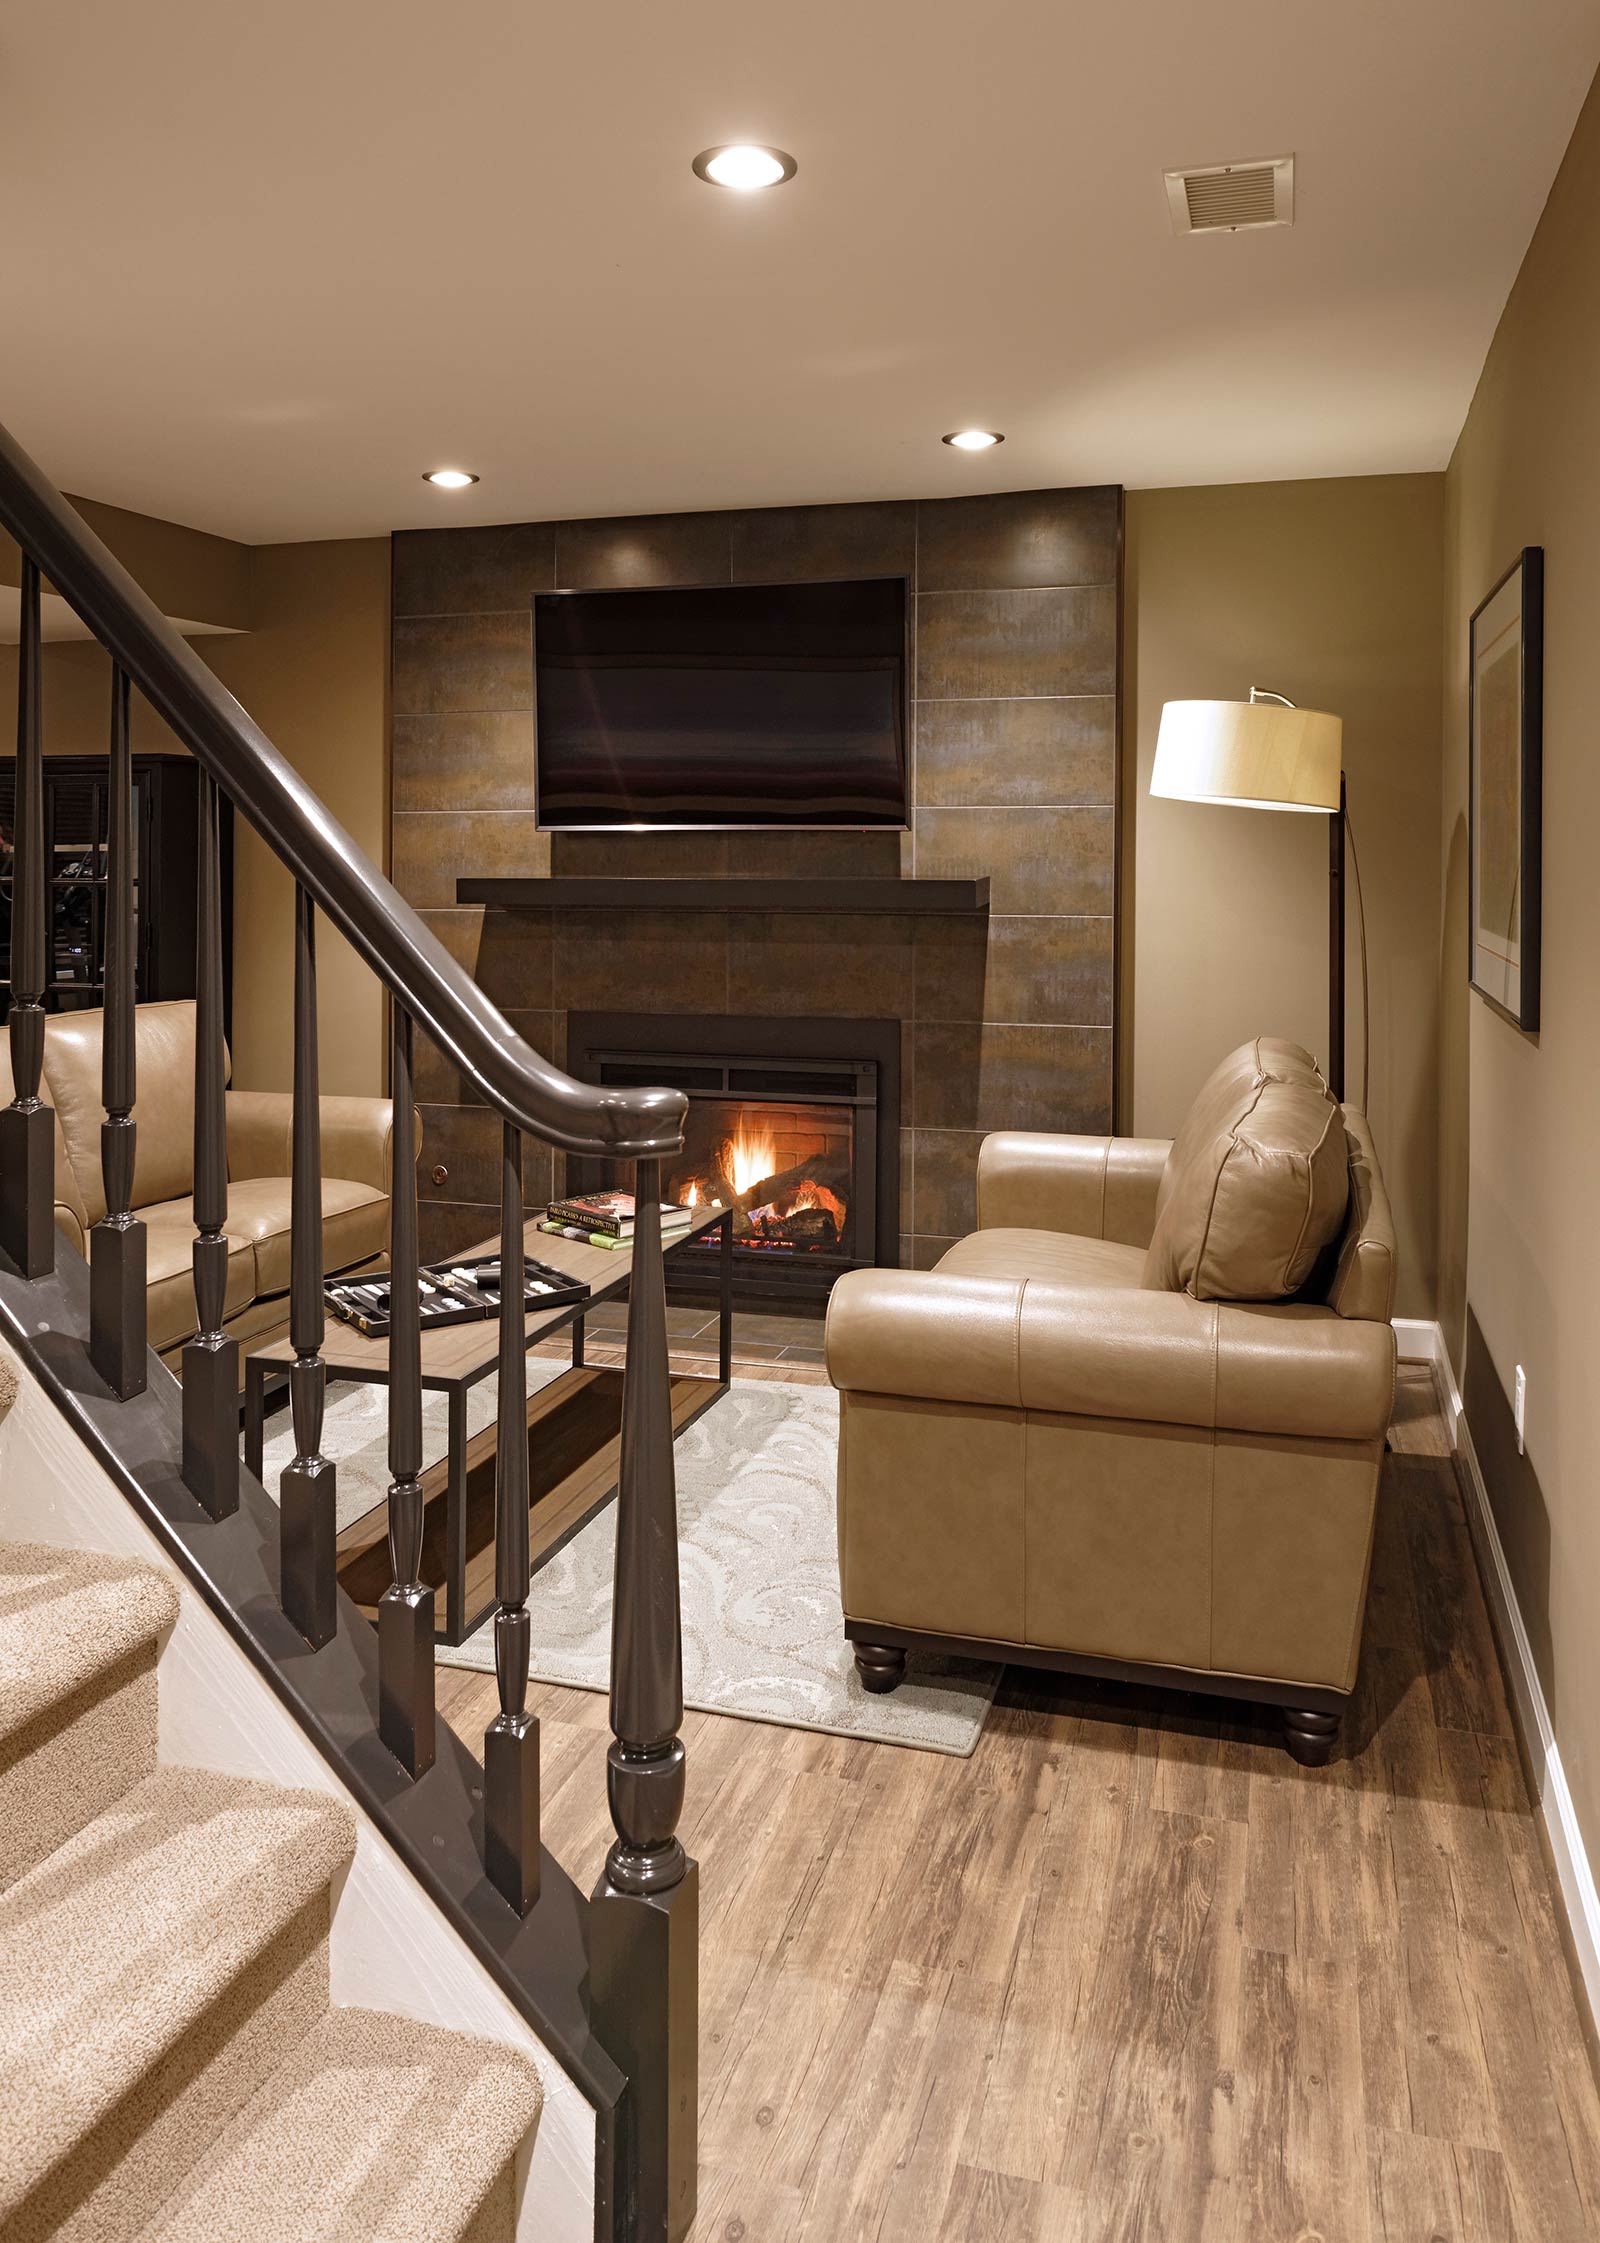 Basement with wellness design in mind with gas fireplace